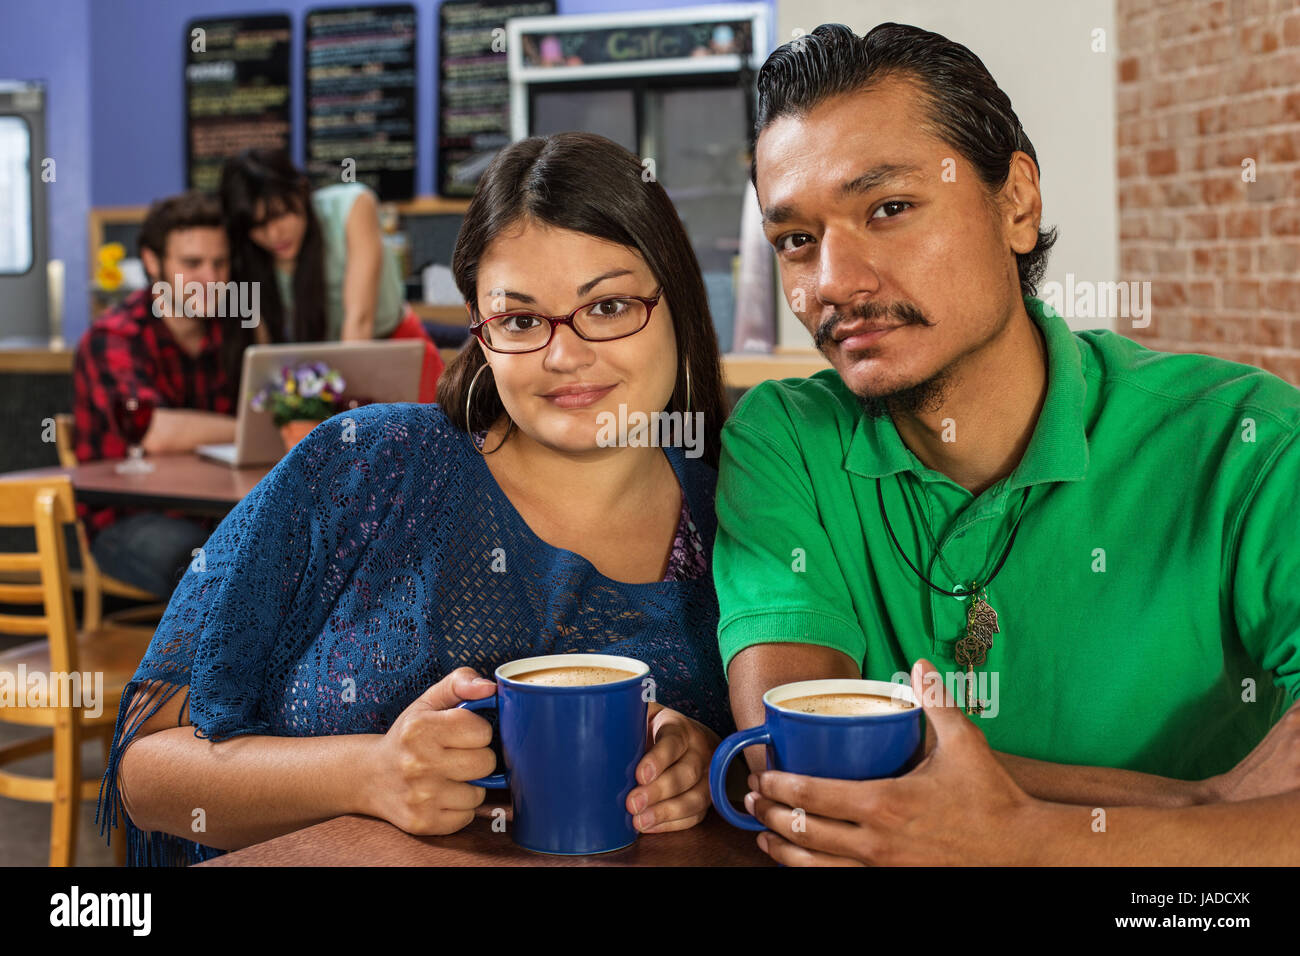 Grinning Latino and Asian couple in cafe Stock Photo